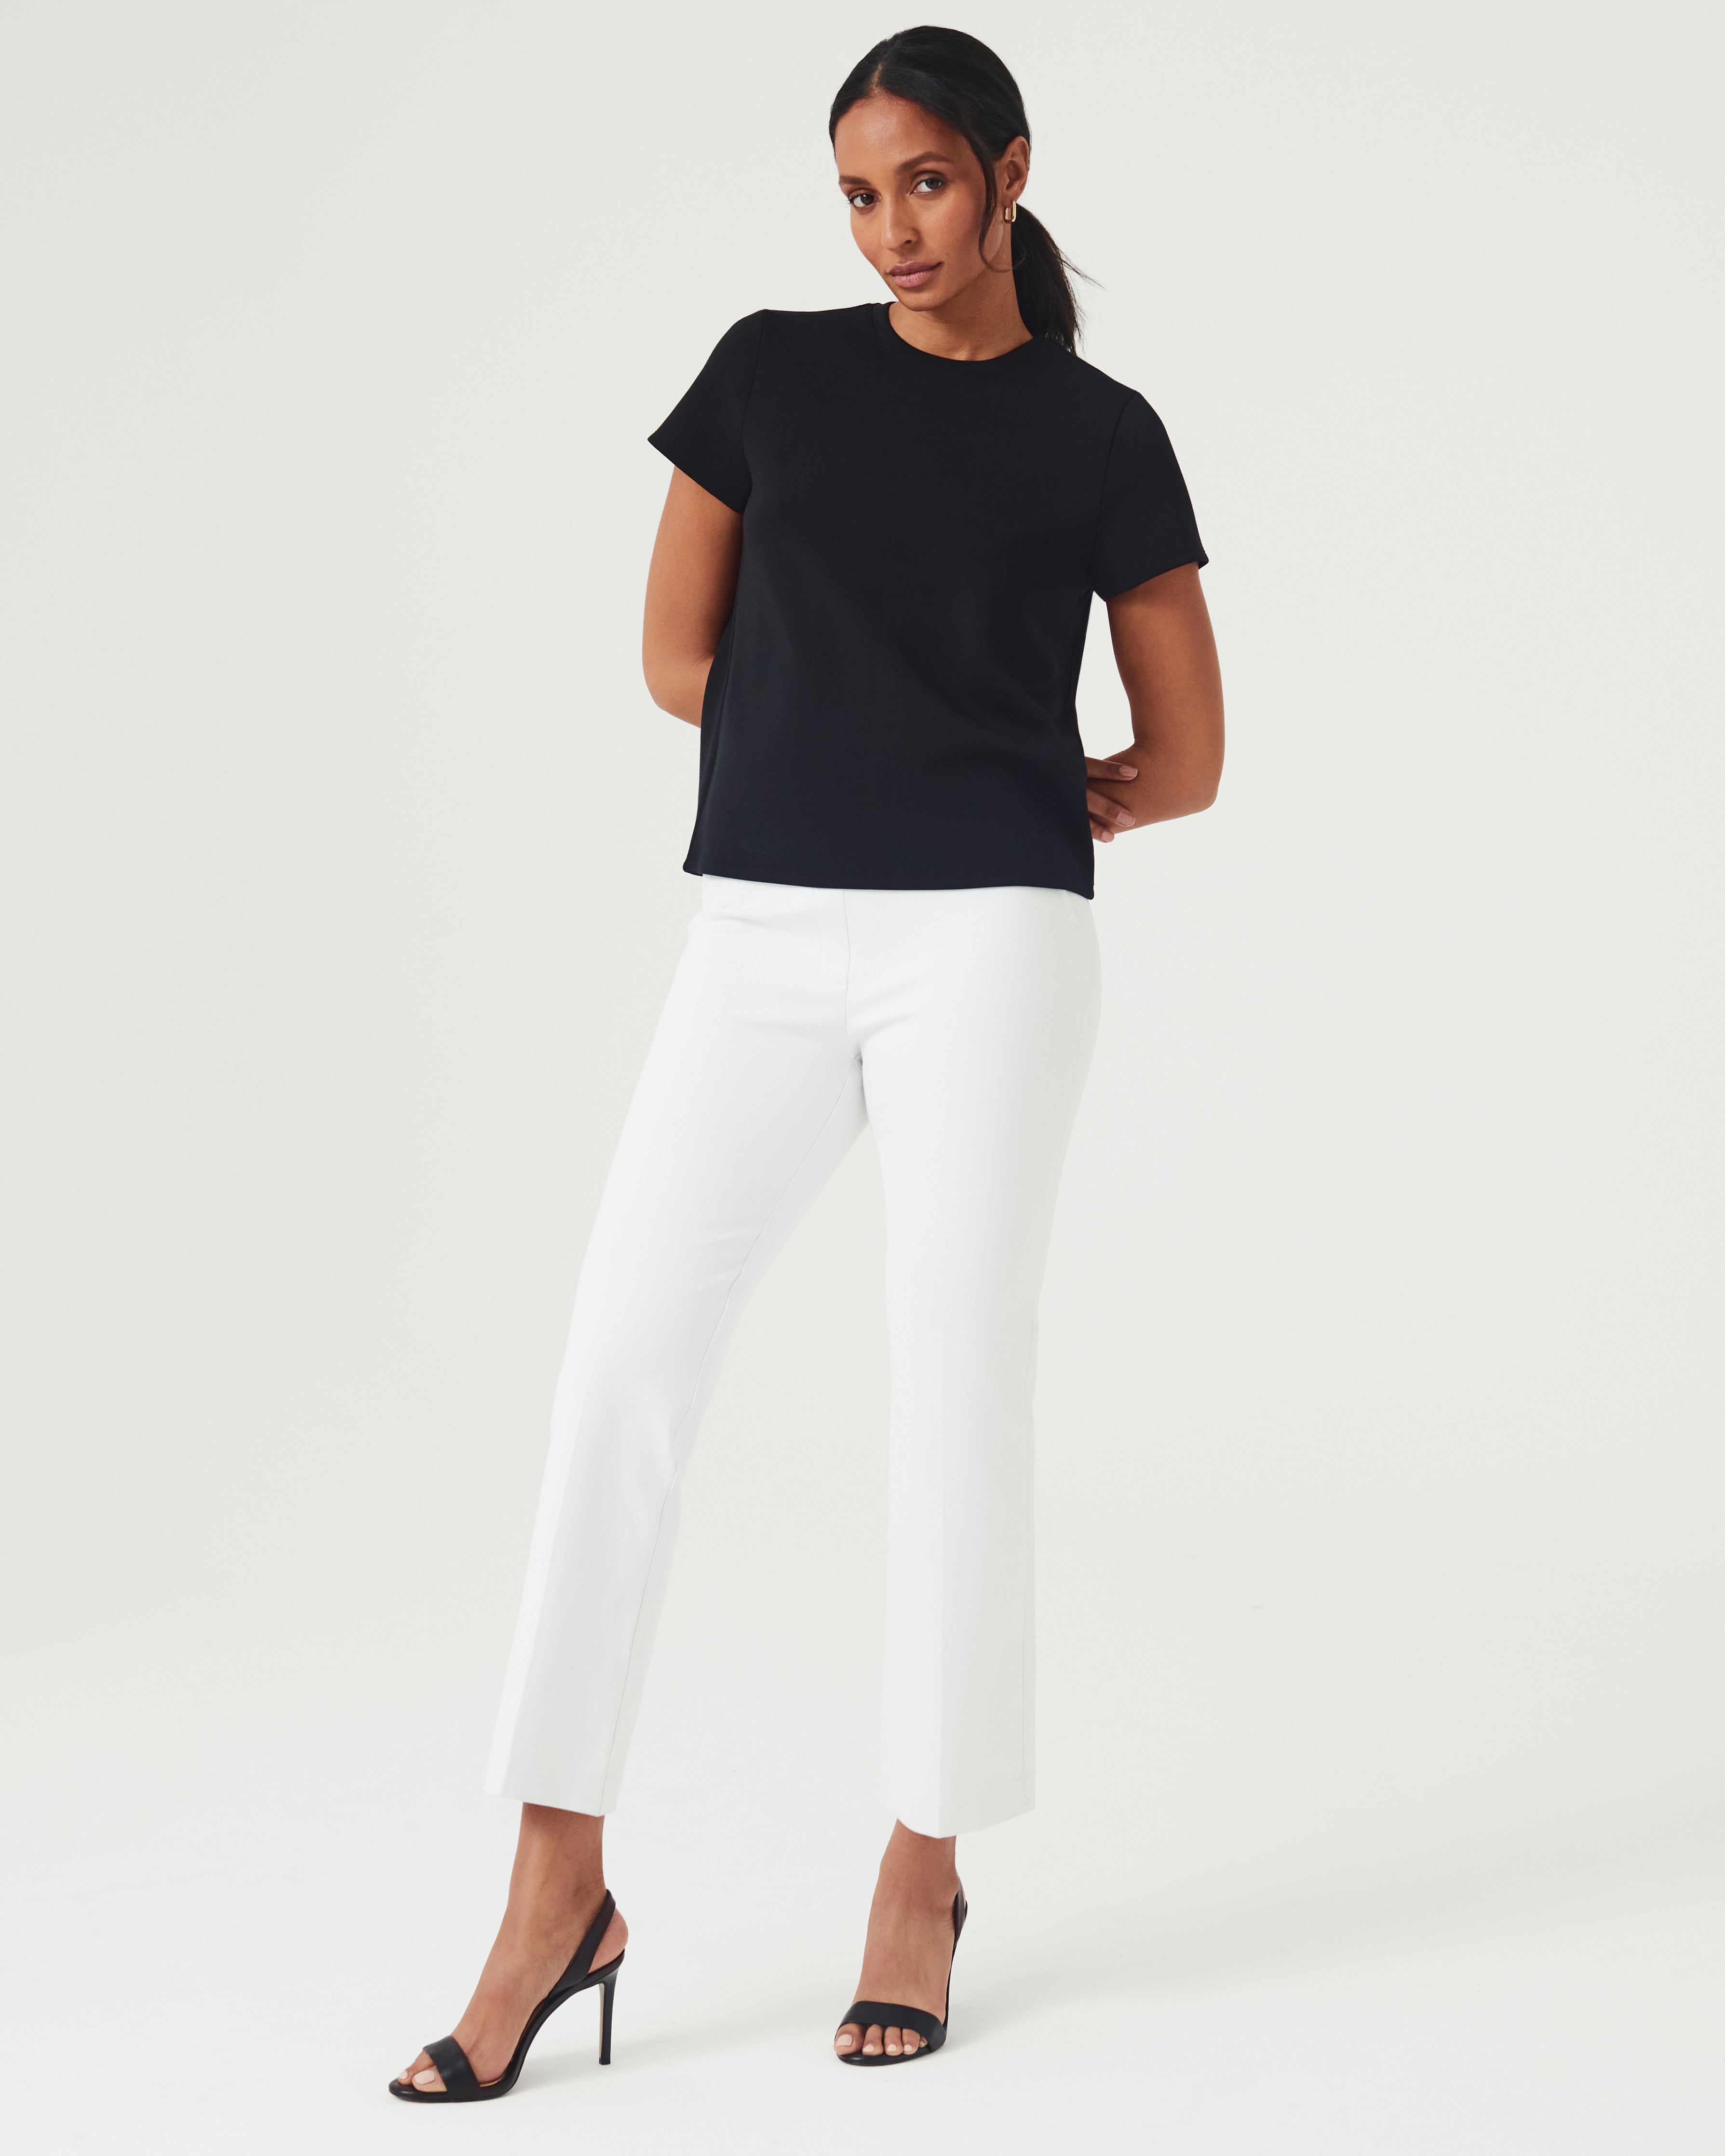 Spanx White Pants with Silver Lining Technology - OAAA